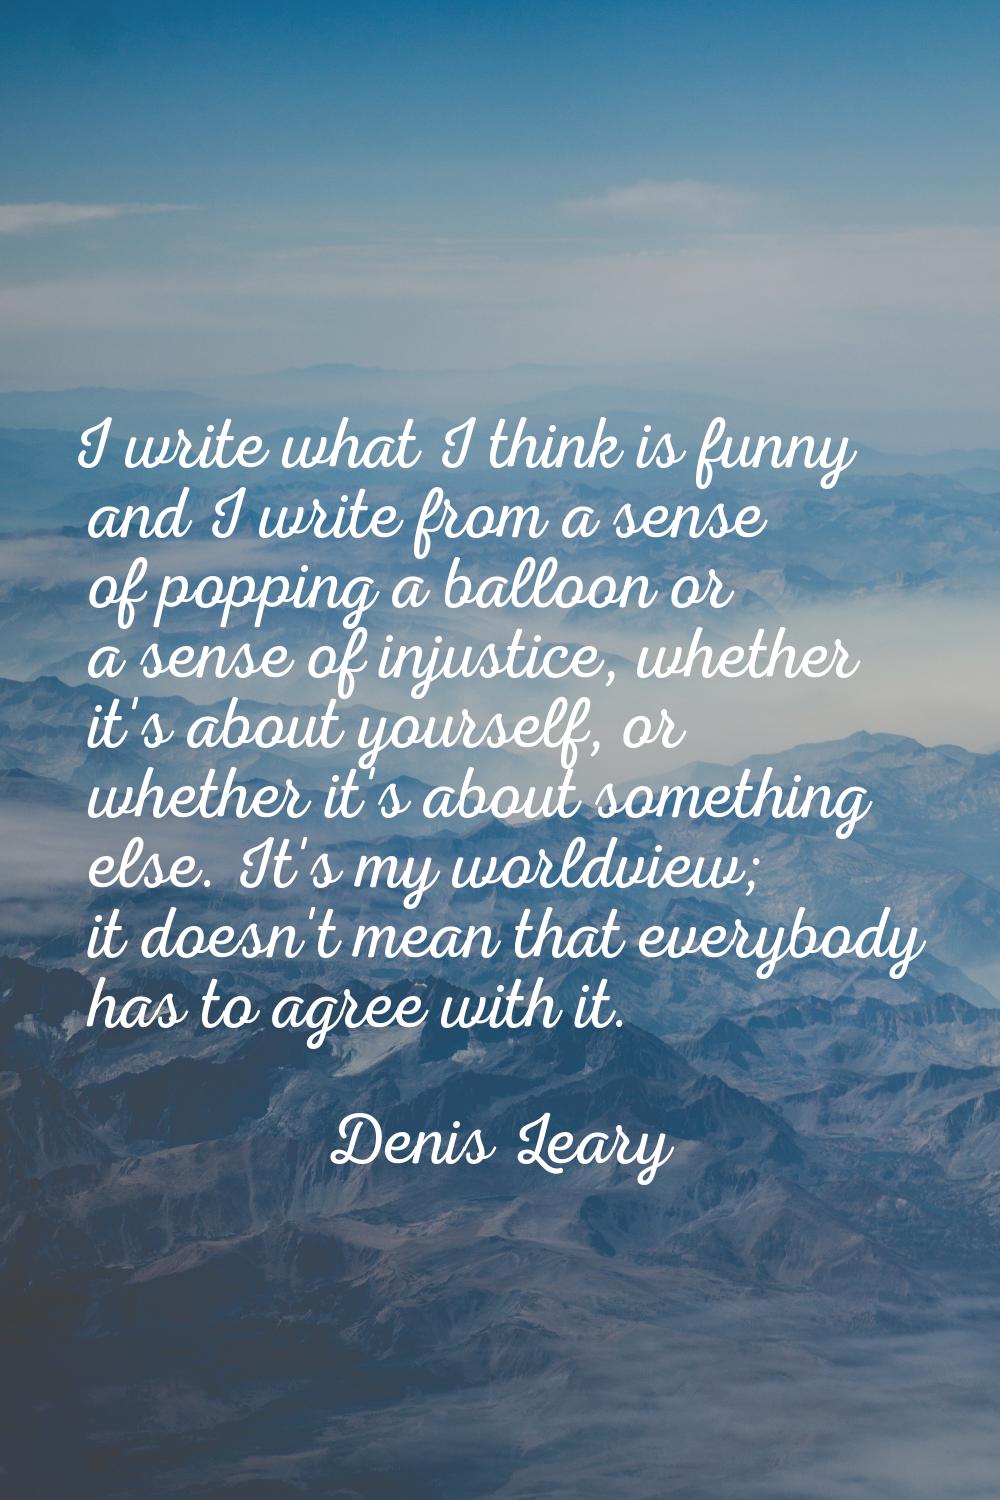 I write what I think is funny and I write from a sense of popping a balloon or a sense of injustice